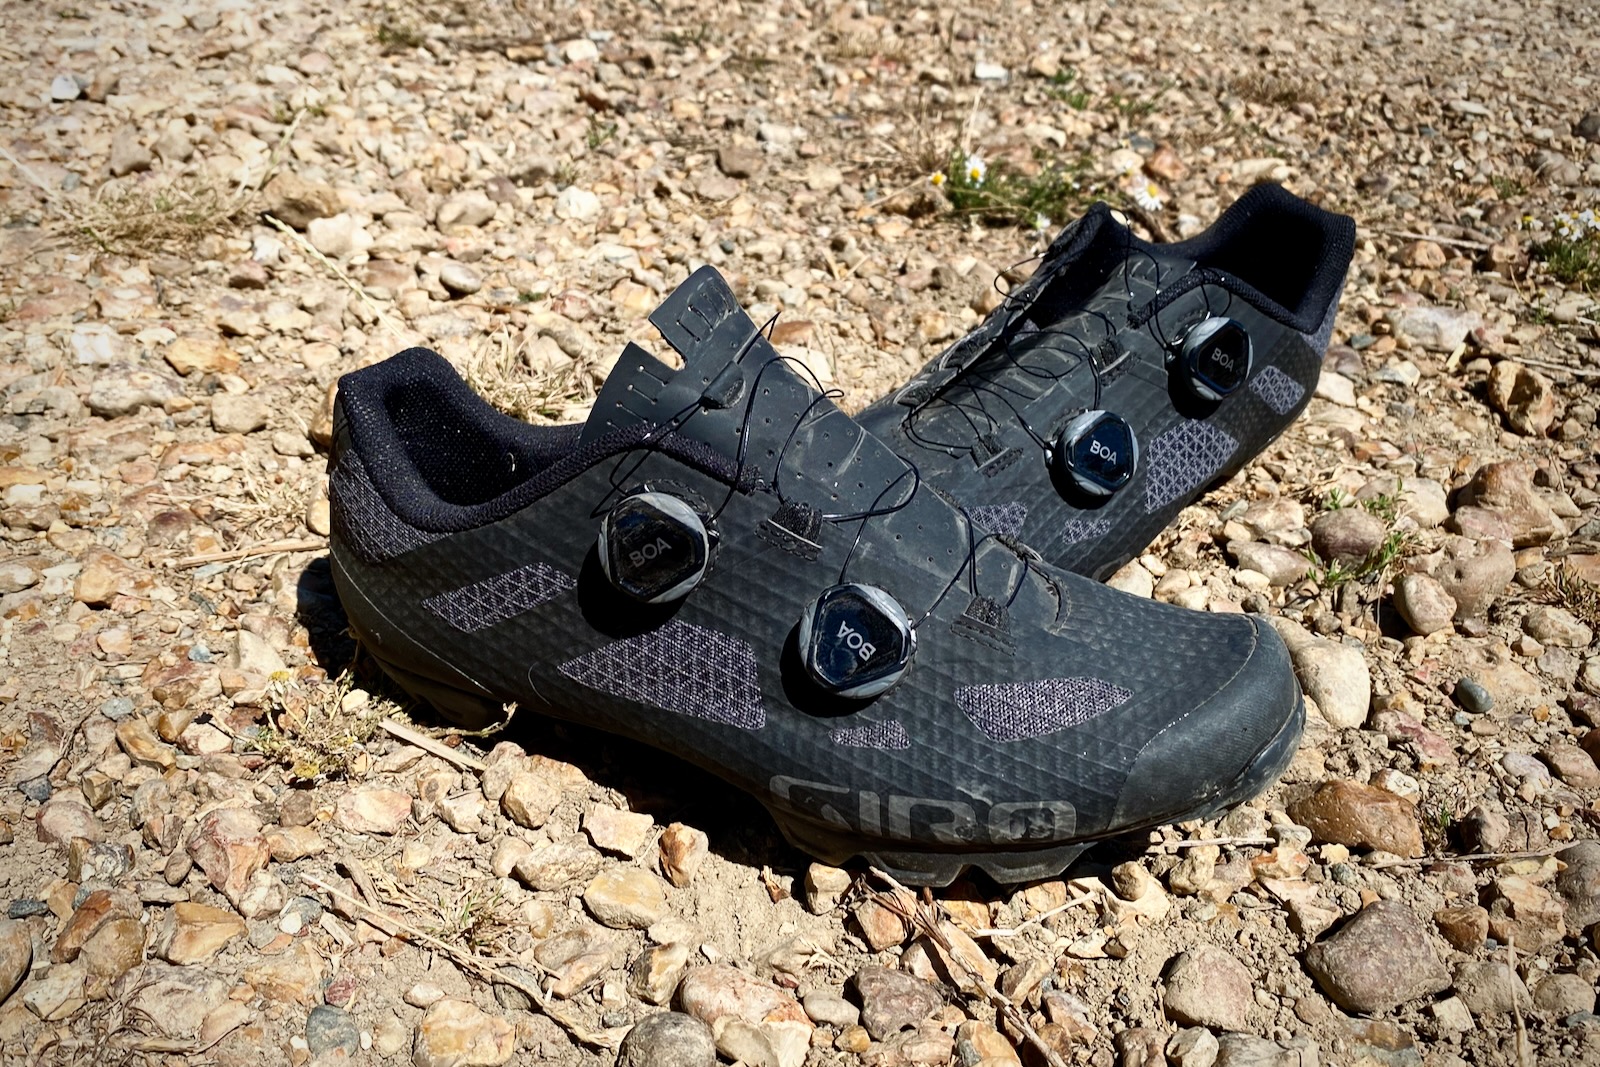 Review – Giro Sector MTB Gravel Cycling Shoes